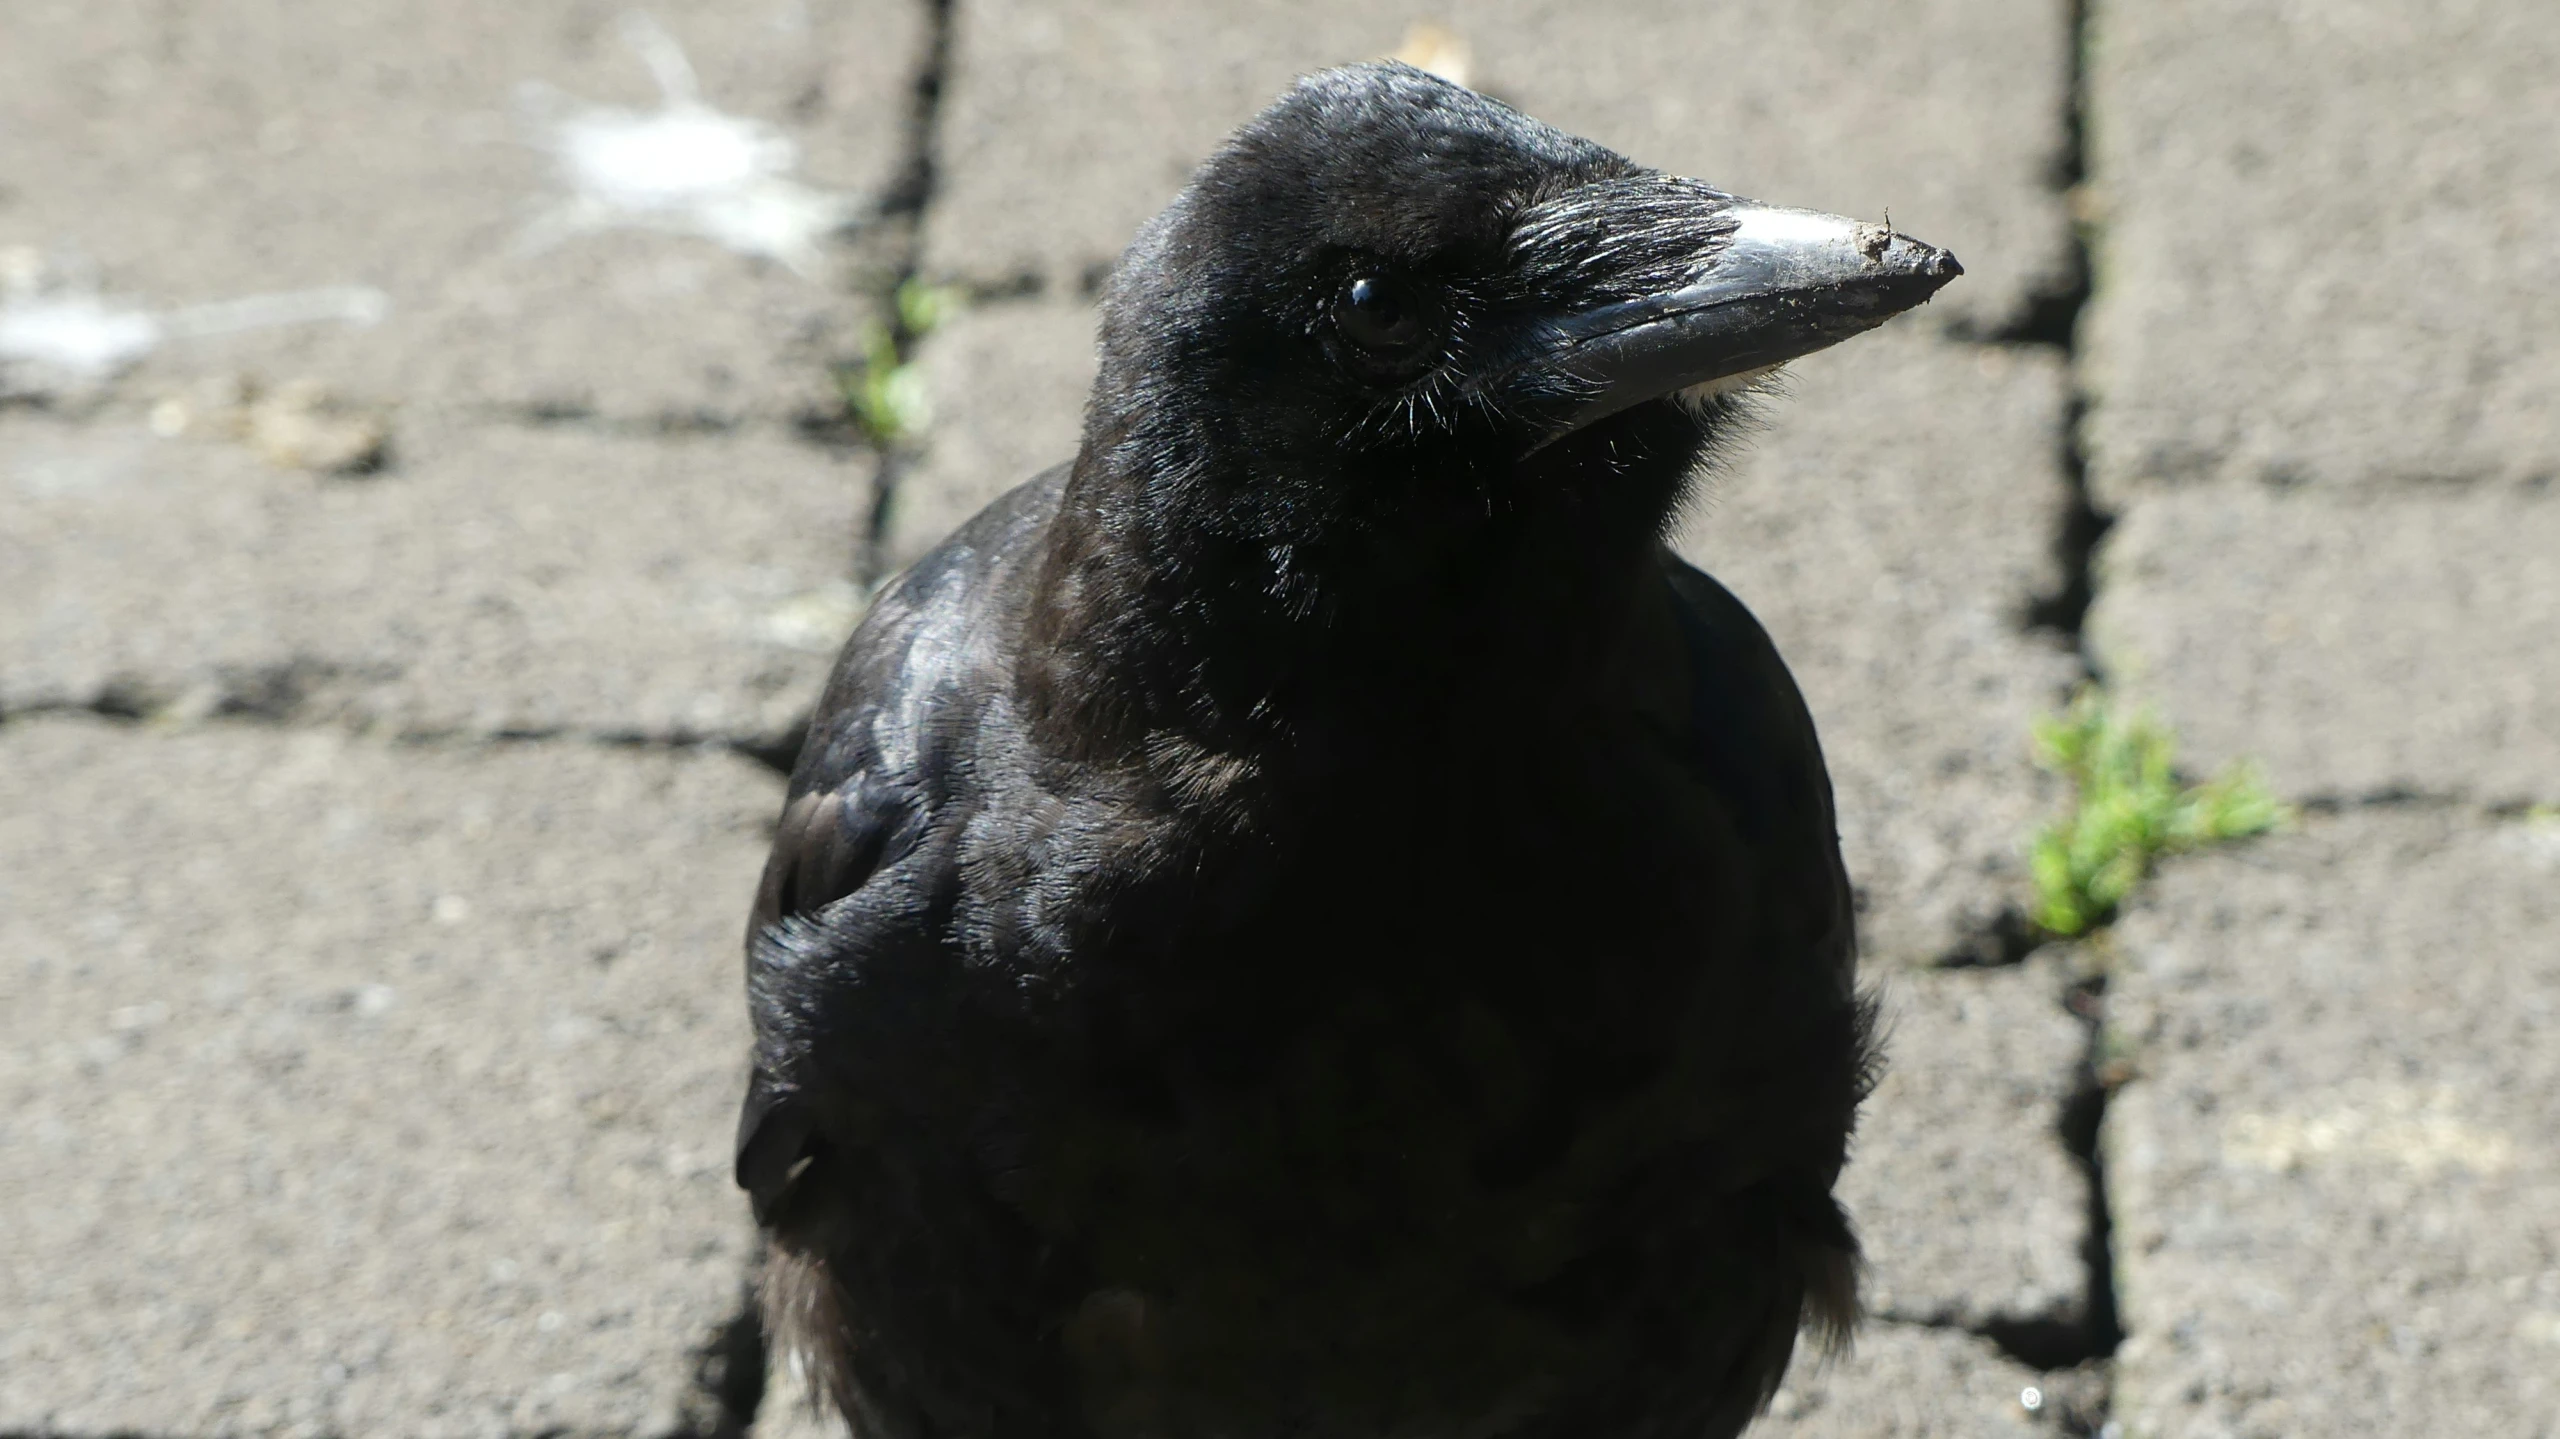 a black crow looking directly into the camera lens